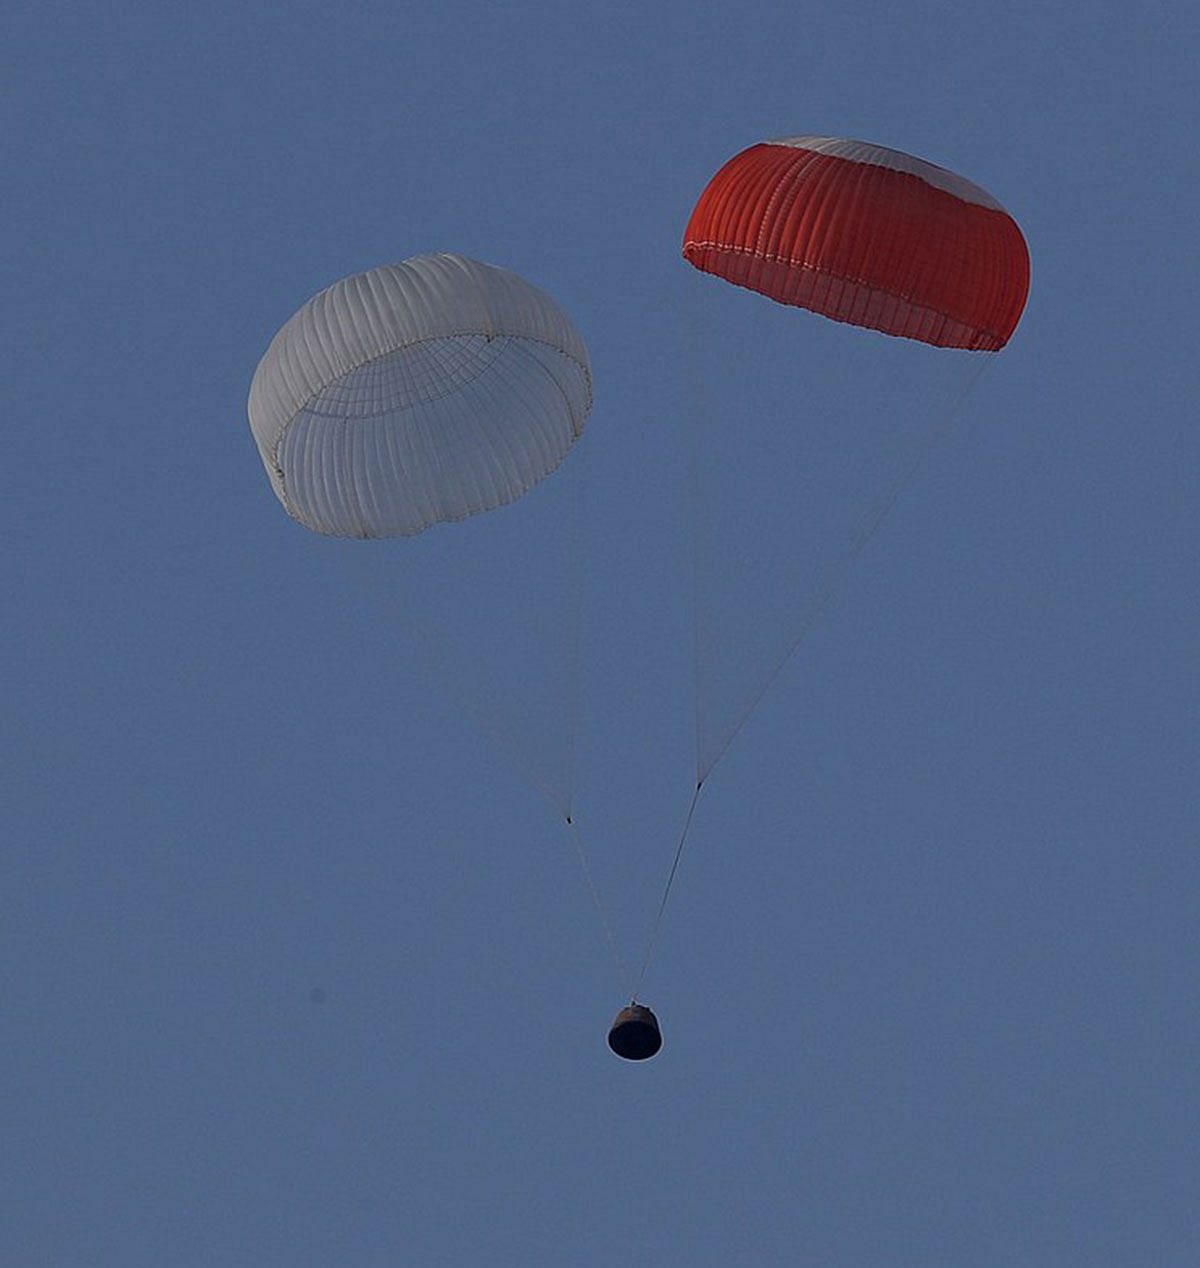 Dummy Gaganyaan crew module descends under parachutes, after Pad Abort Test conducted on 5 July 2018